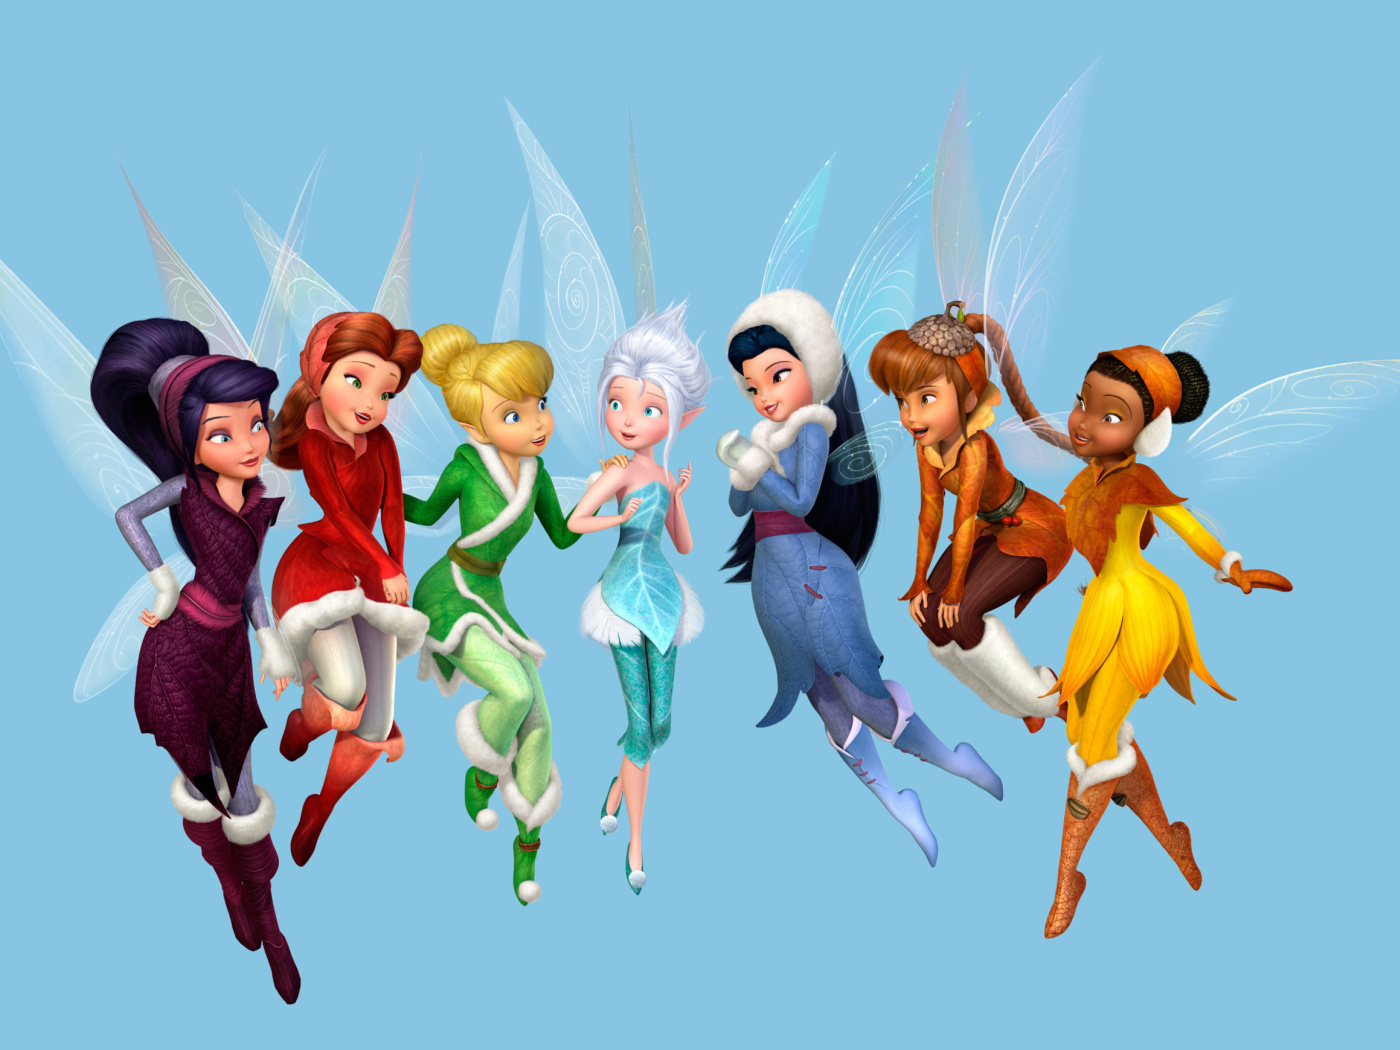 Das Tinkerbell and the Mysterious Winter Woods Wallpaper 1400x1050